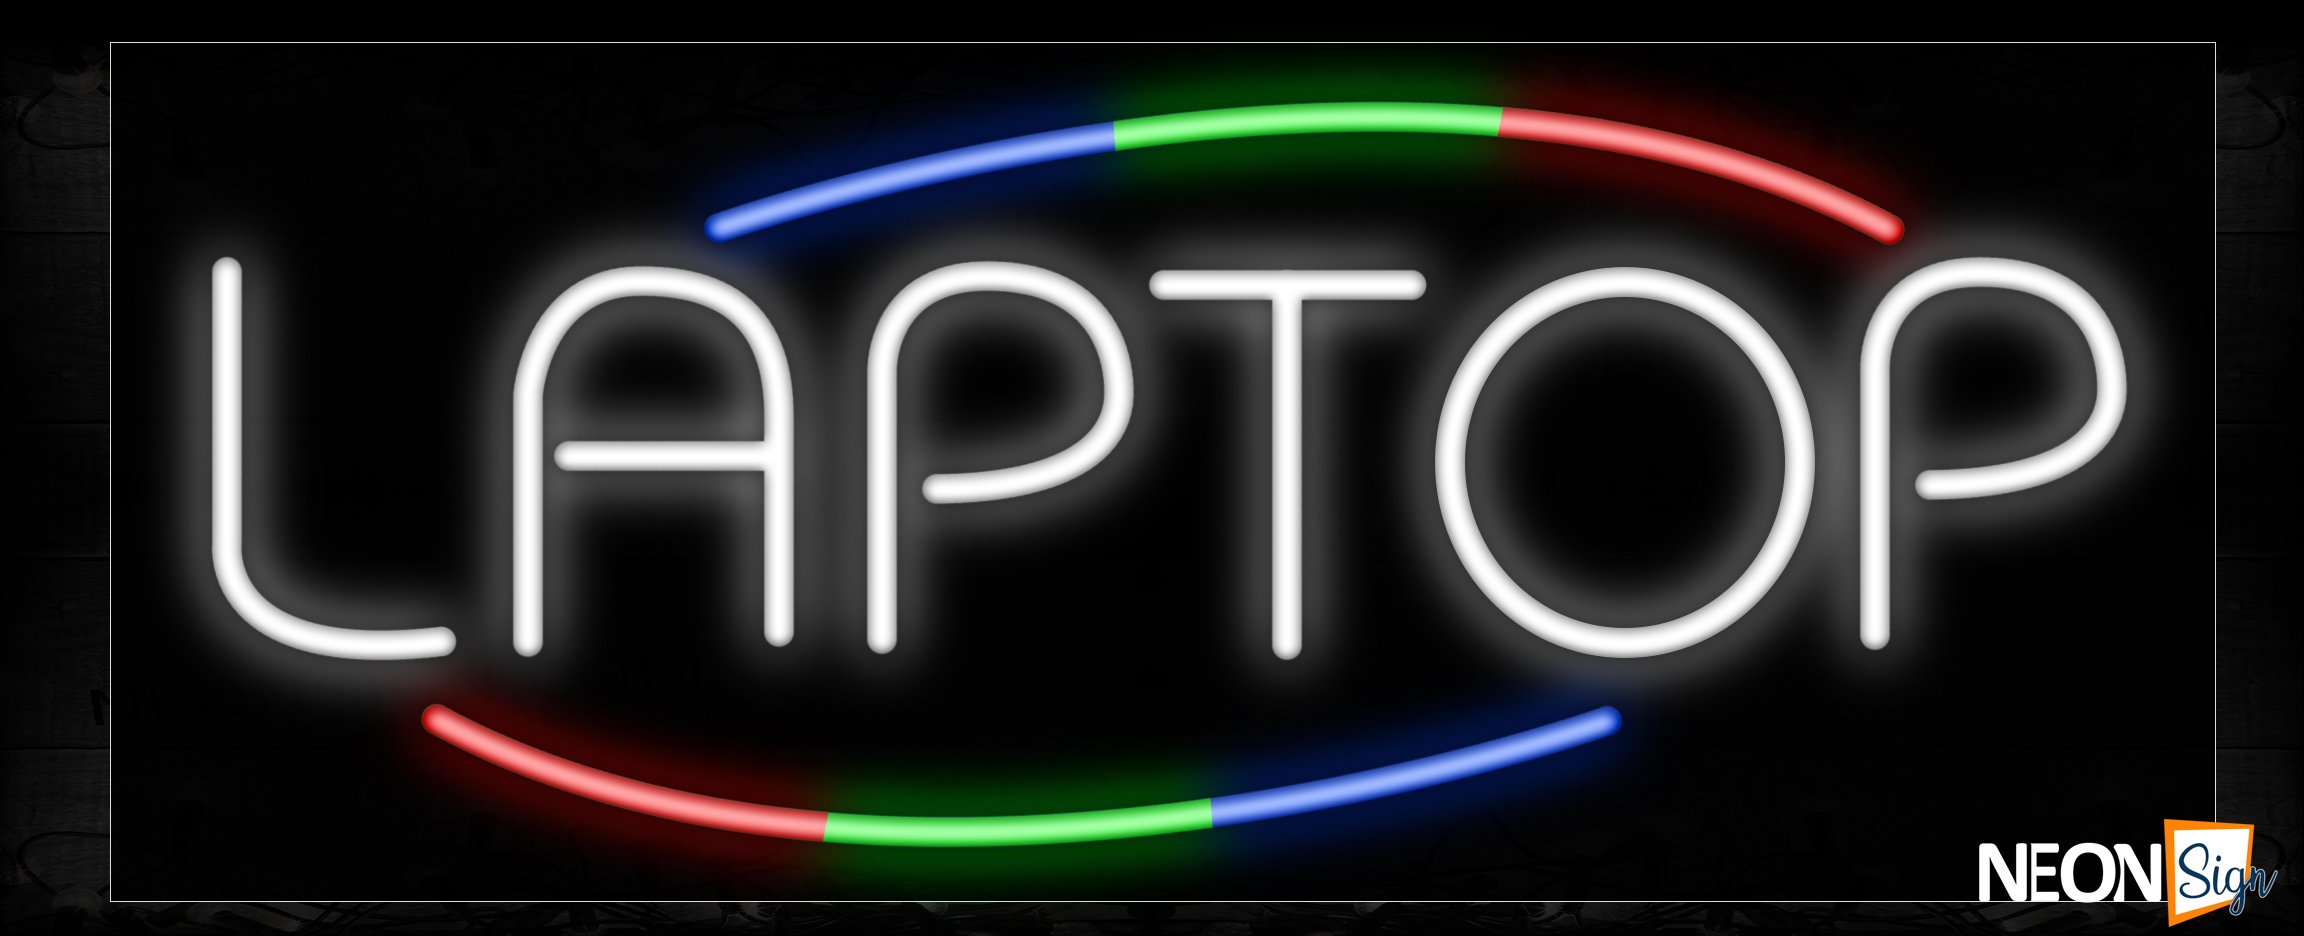 Image of 10823 Laptop with colorful arc border Neon Sign_13x32 Black Backing